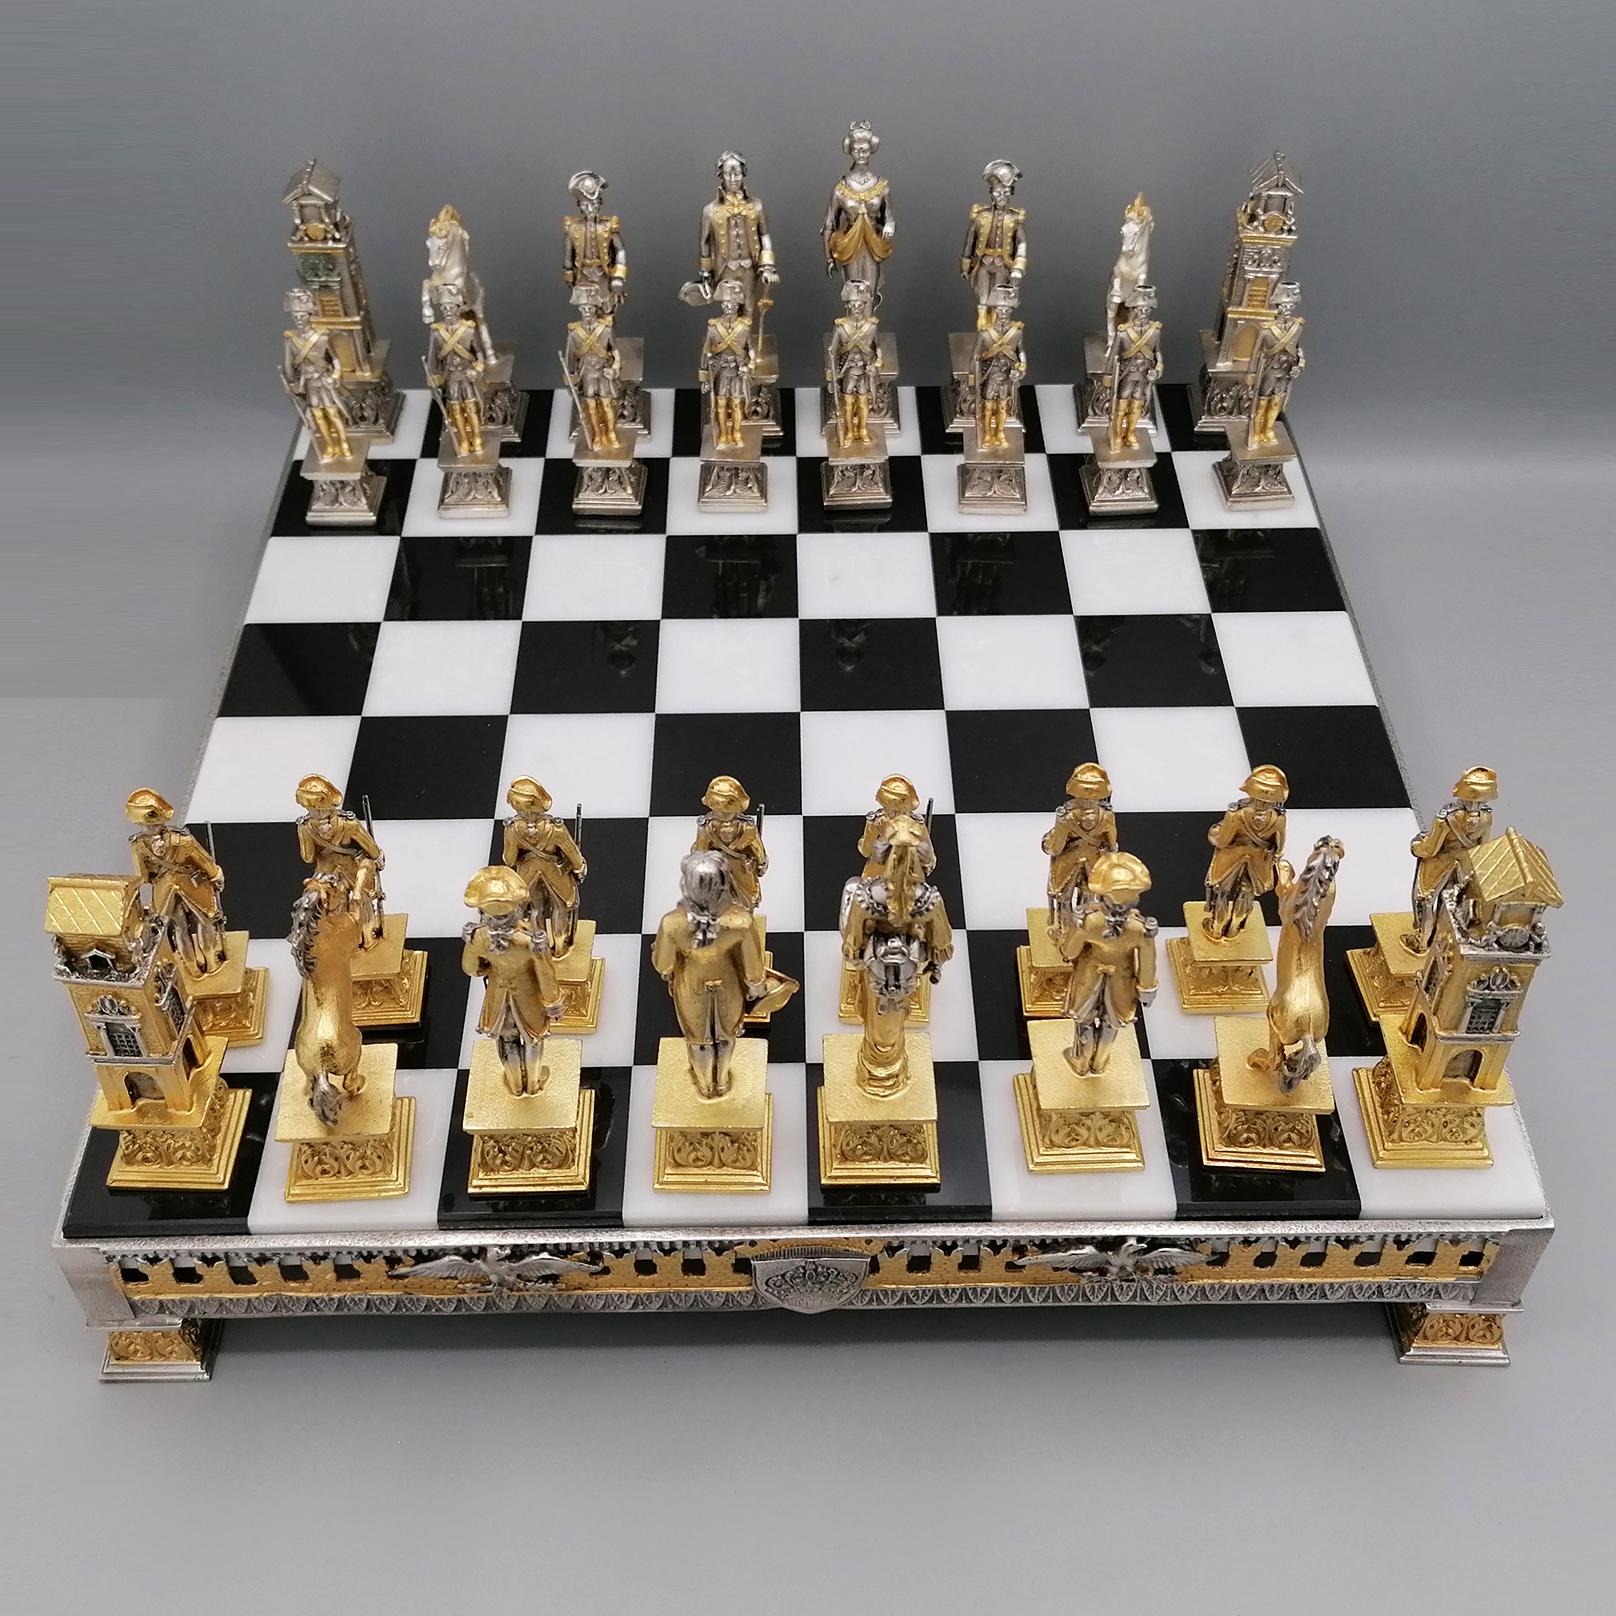 Empire style chess board and game.
The chess game was made of brass with the casting technique.
Subsequently silvered and thick gold-plated with a two-tone finish.
The base is always in two-tone brass with friezes of noble coats of arms and eagles,